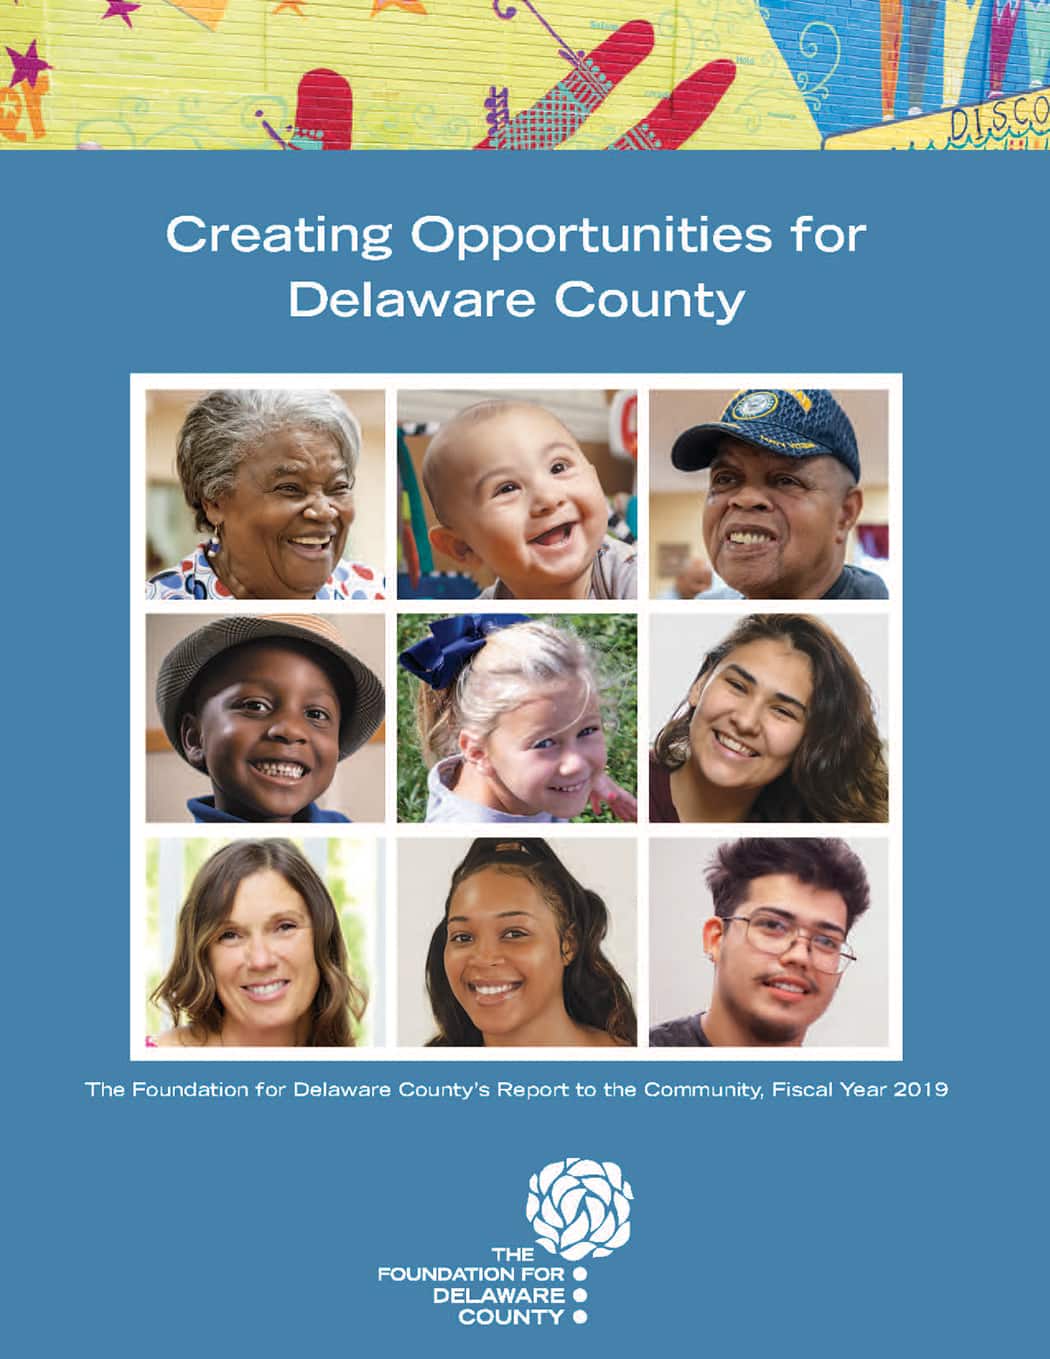 The Foundation for Delaware County Annual Report 2019